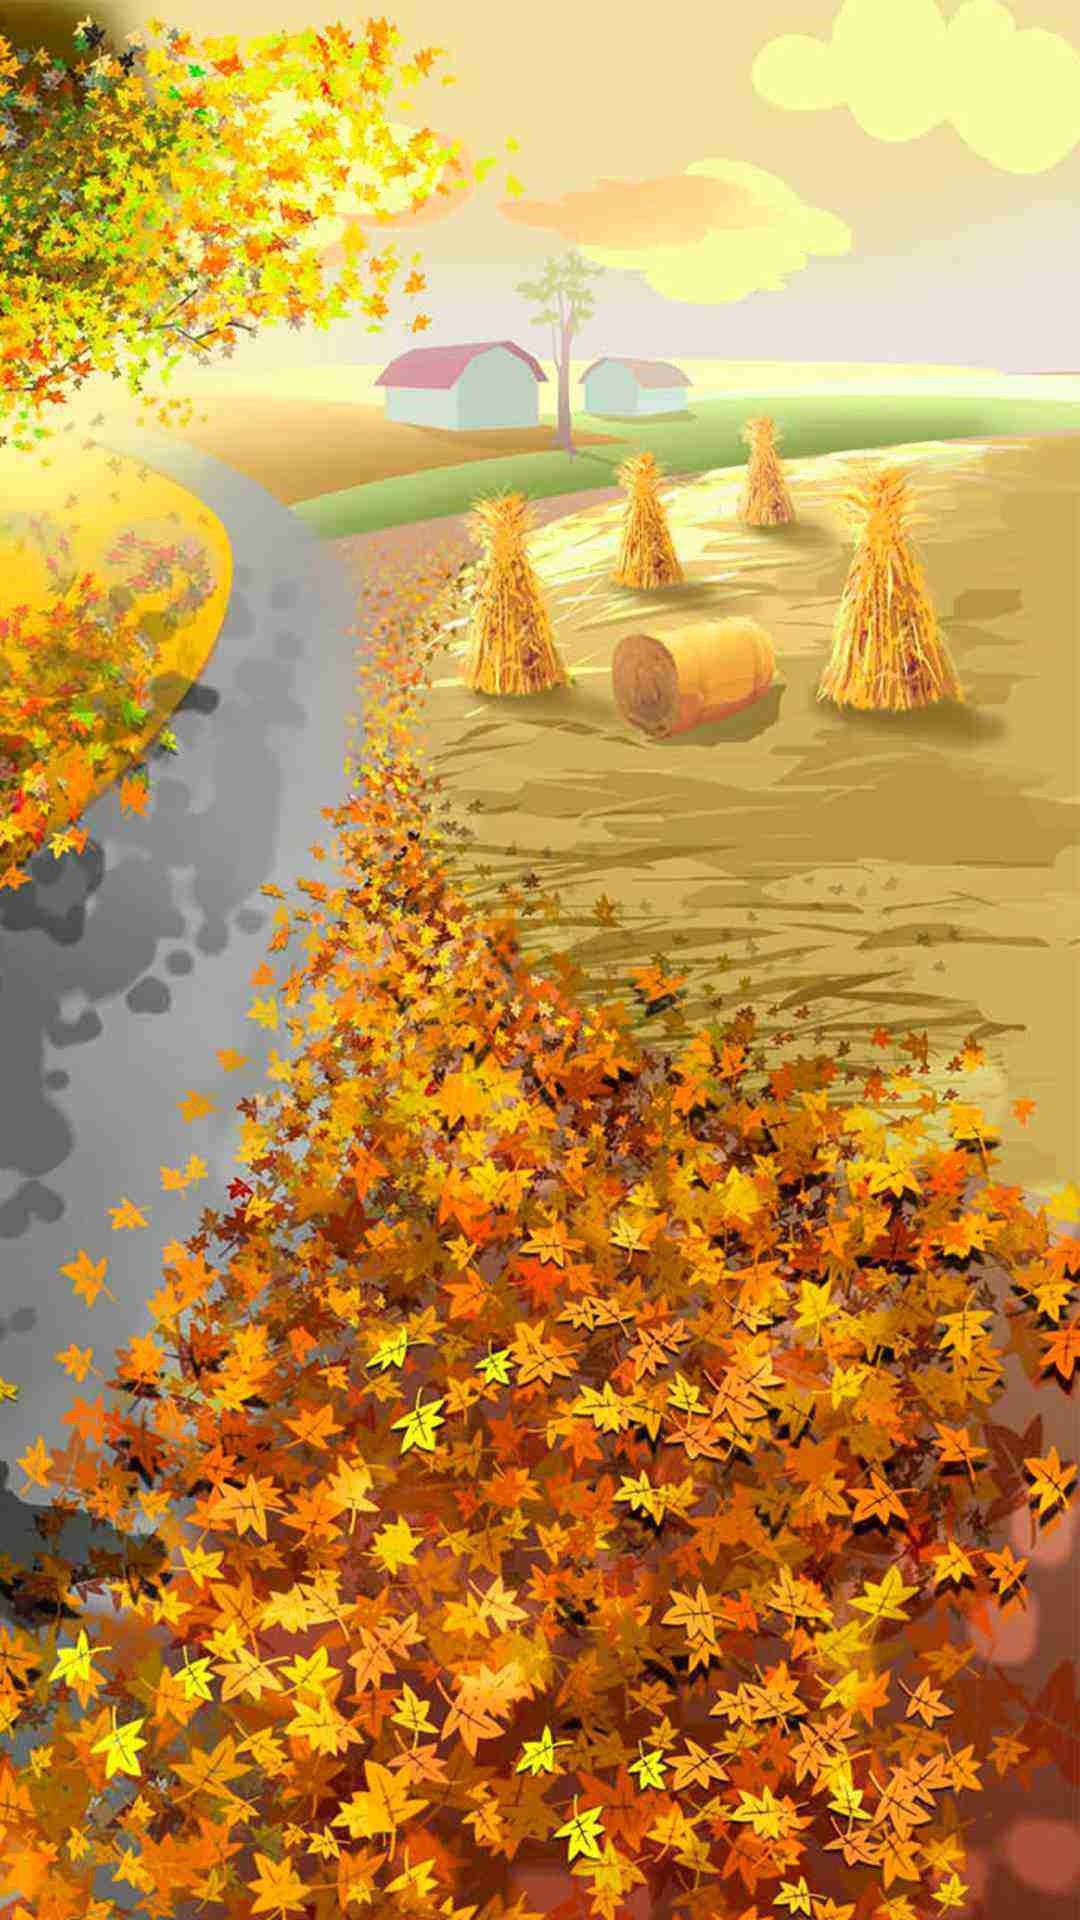 1080x1920 Gold Fall Leaf 2015 Thanksgiving iPhone 6 Plus Wallpaper - Nature, House,  Road